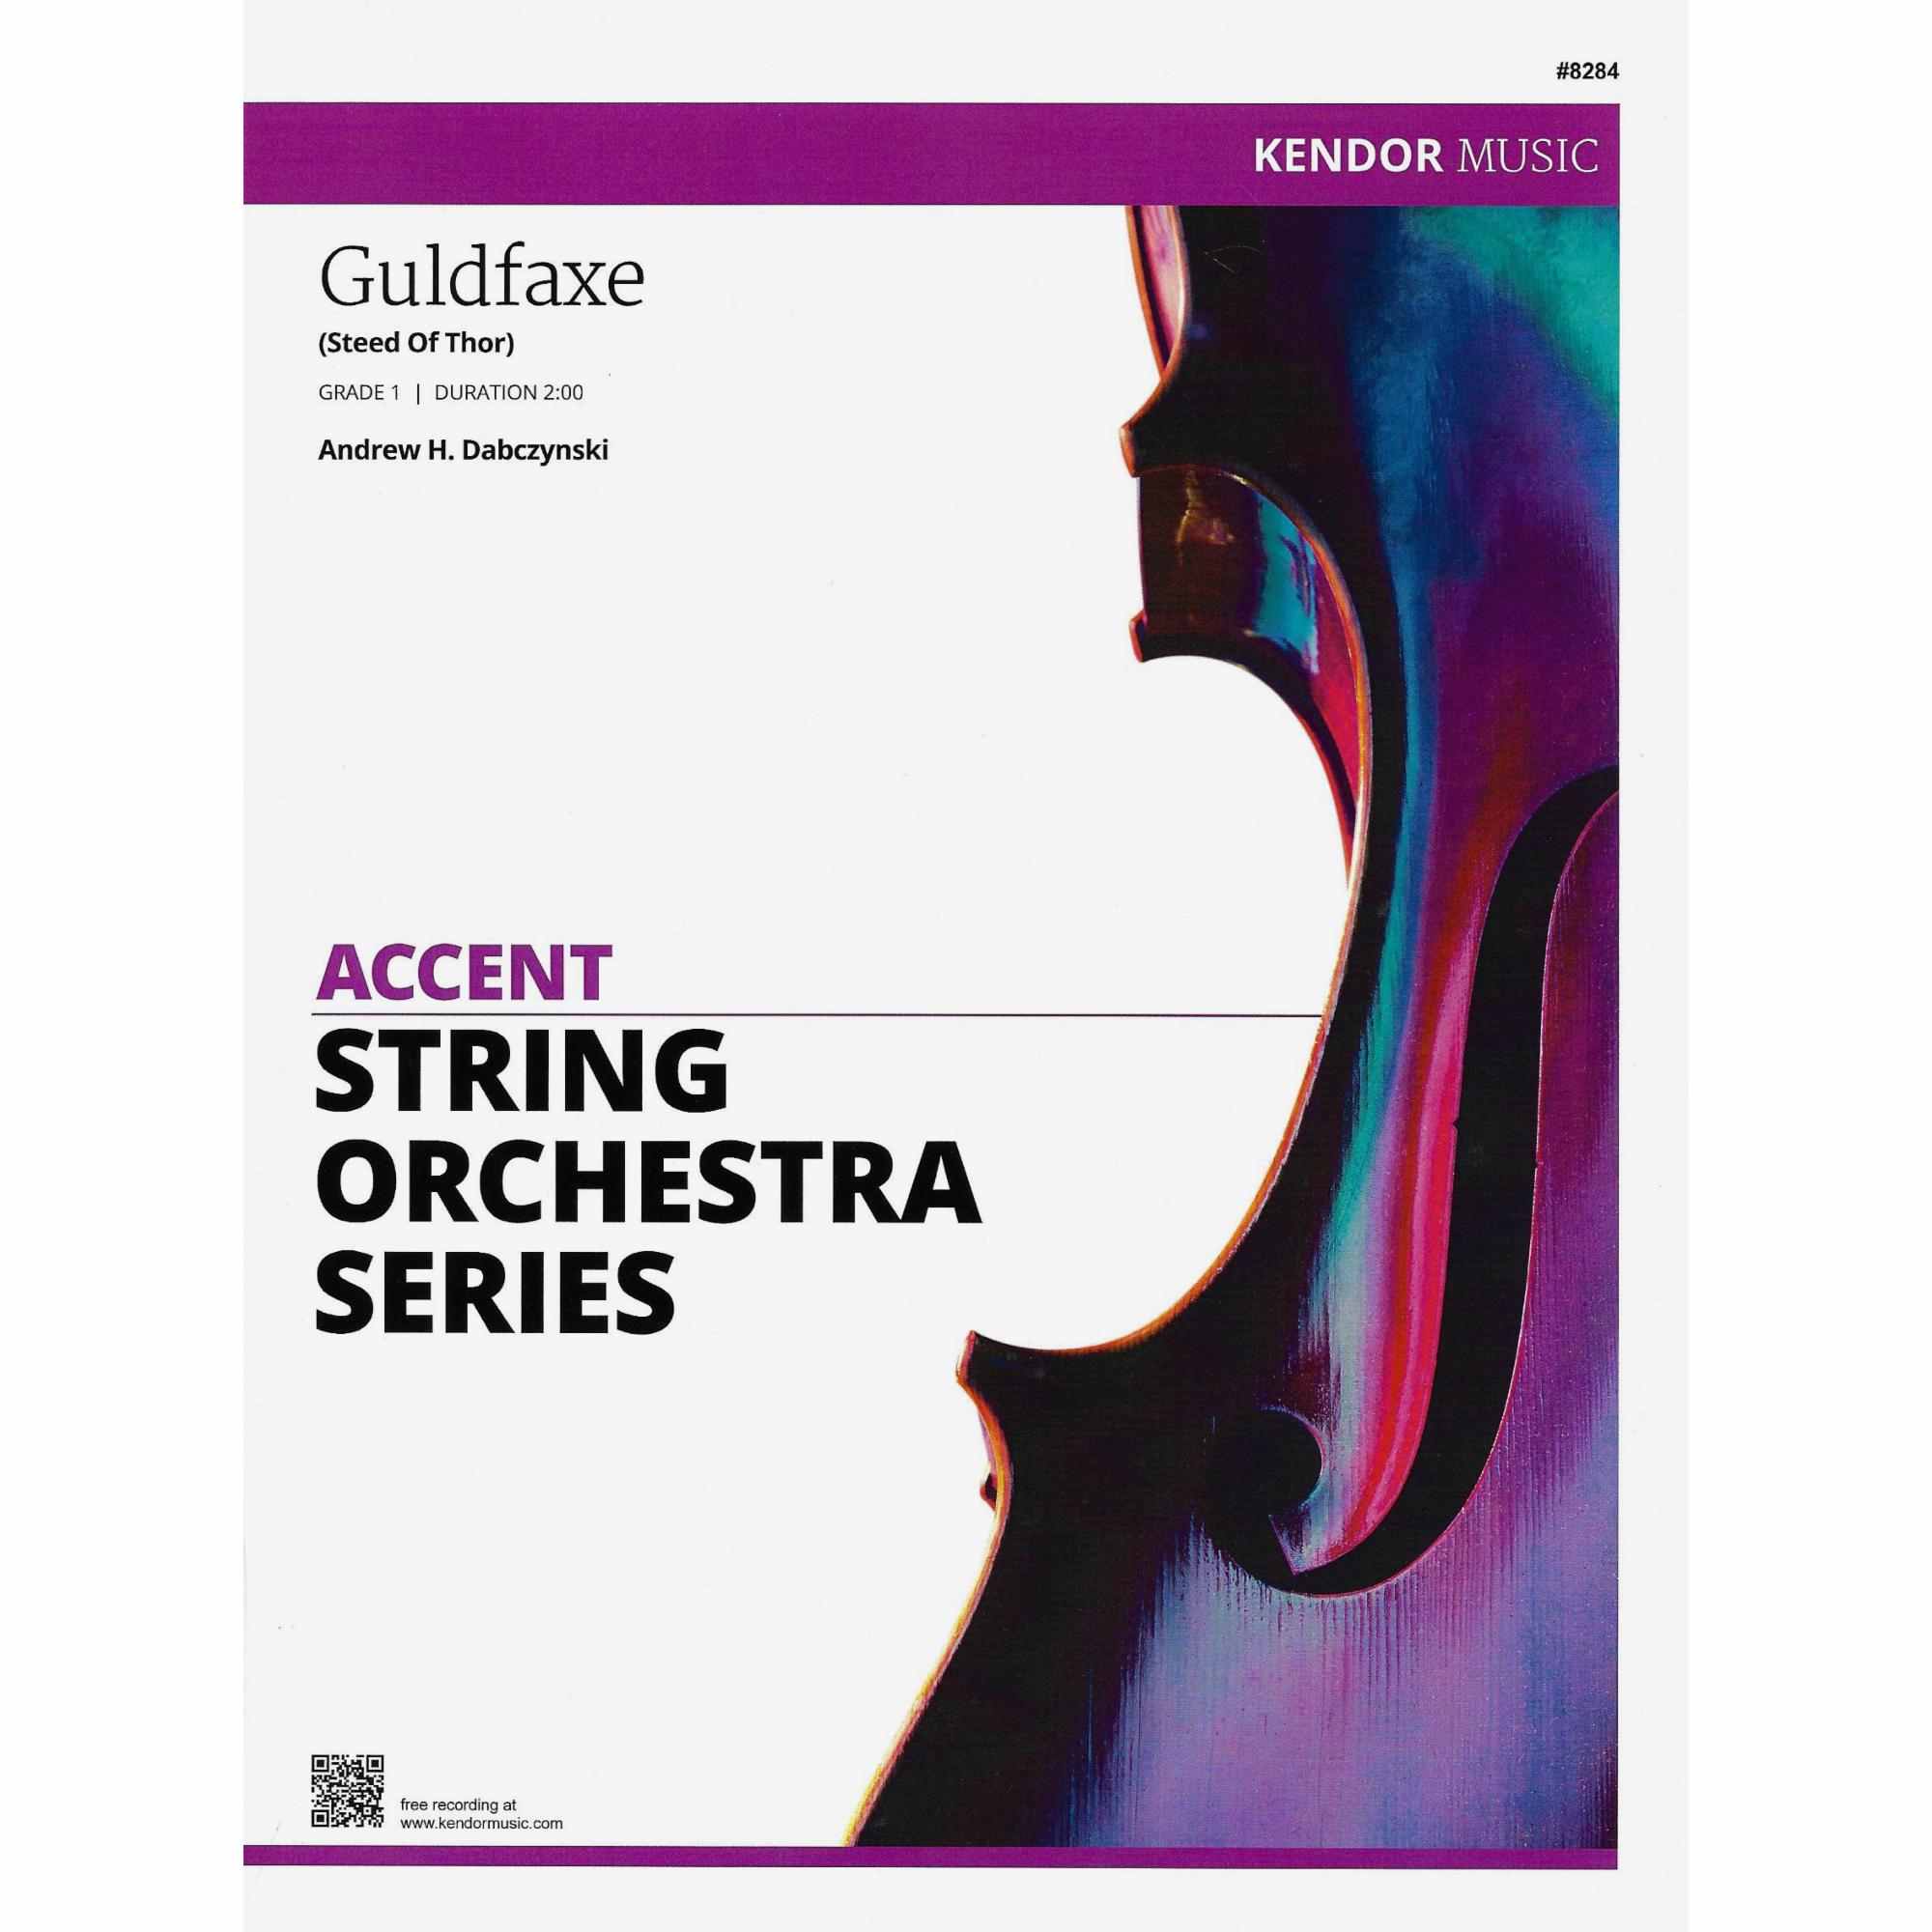 Guldfaxe (Steed of Thor) for String Orchestra